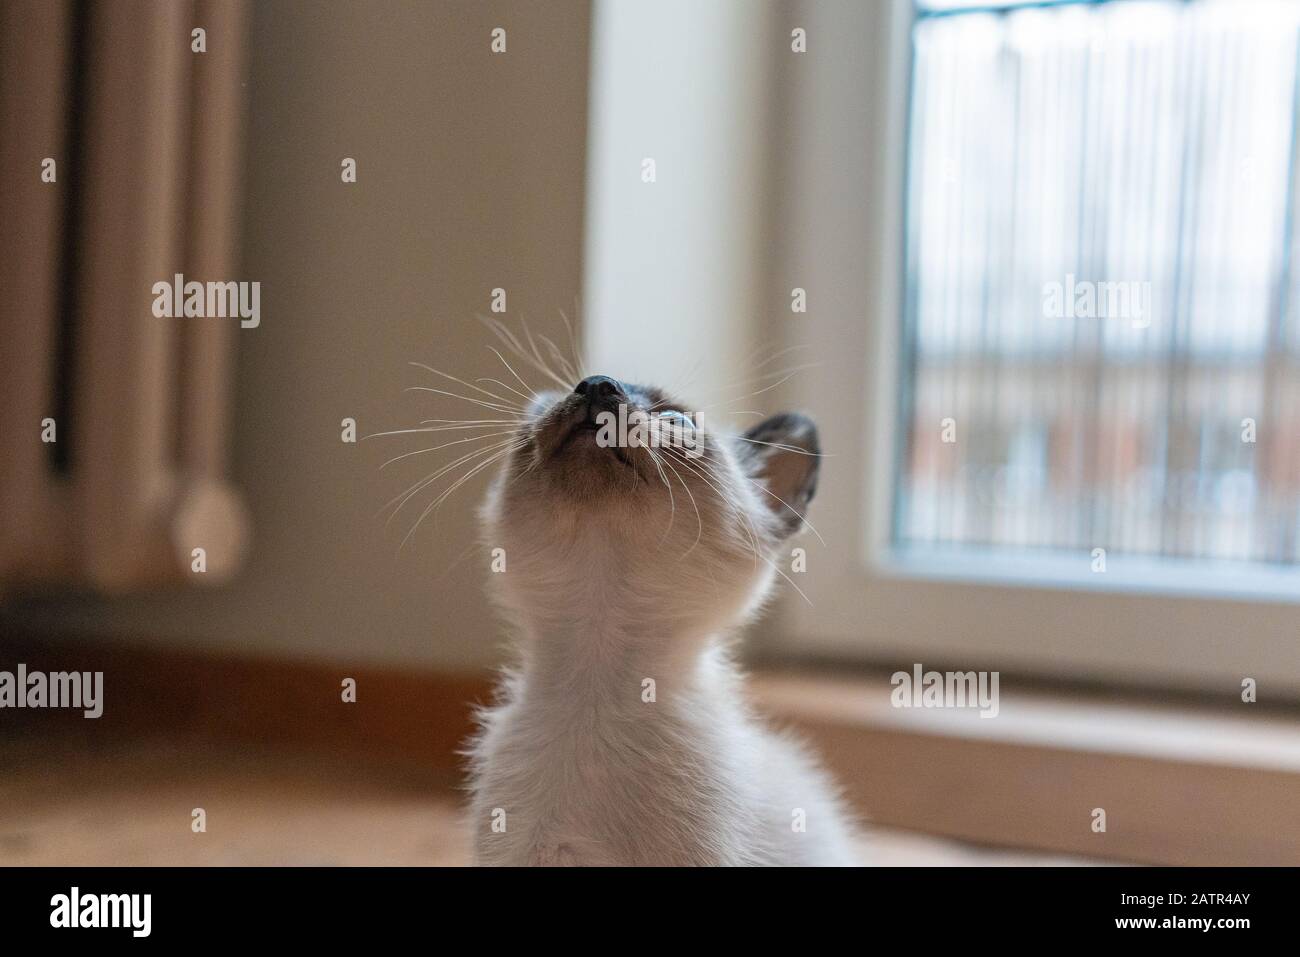 Small light gray kitten looking up. Purebred six weeks old Siamese cat with blue almond shaped eyes on living room background Stock Photo